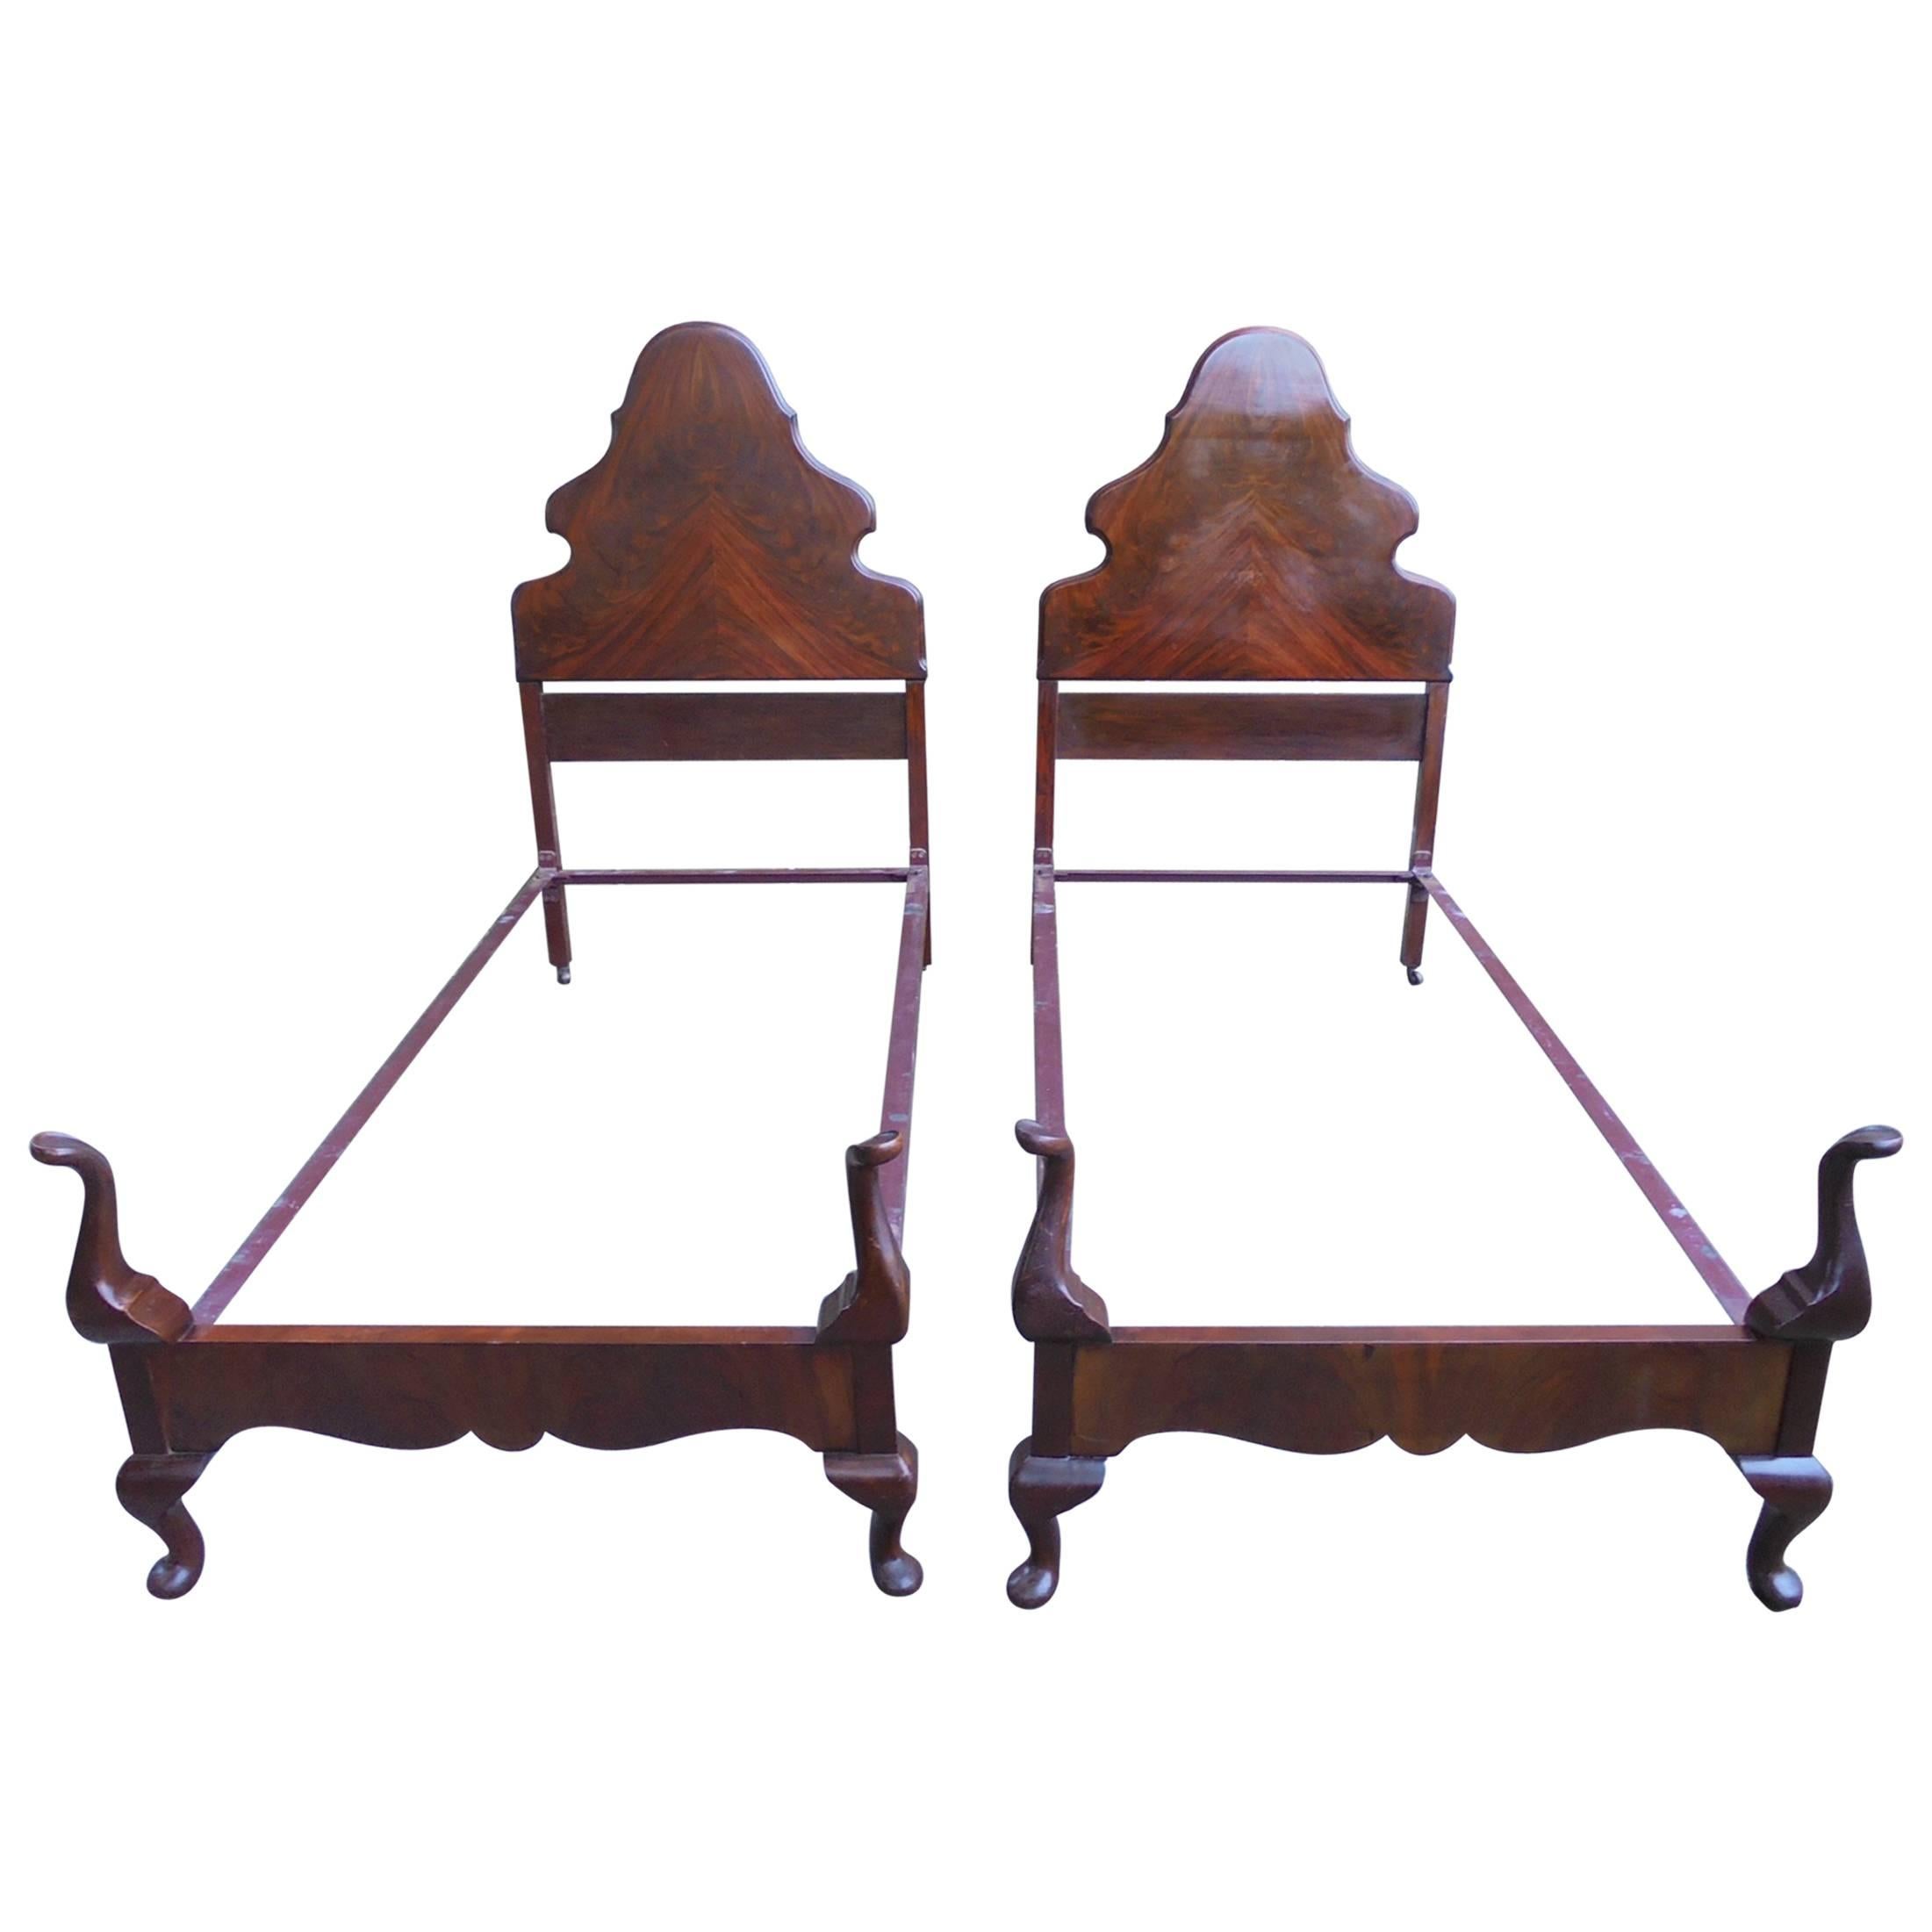 Pair of 1920s Queen Anne Style Mahogany Single Bed Frames